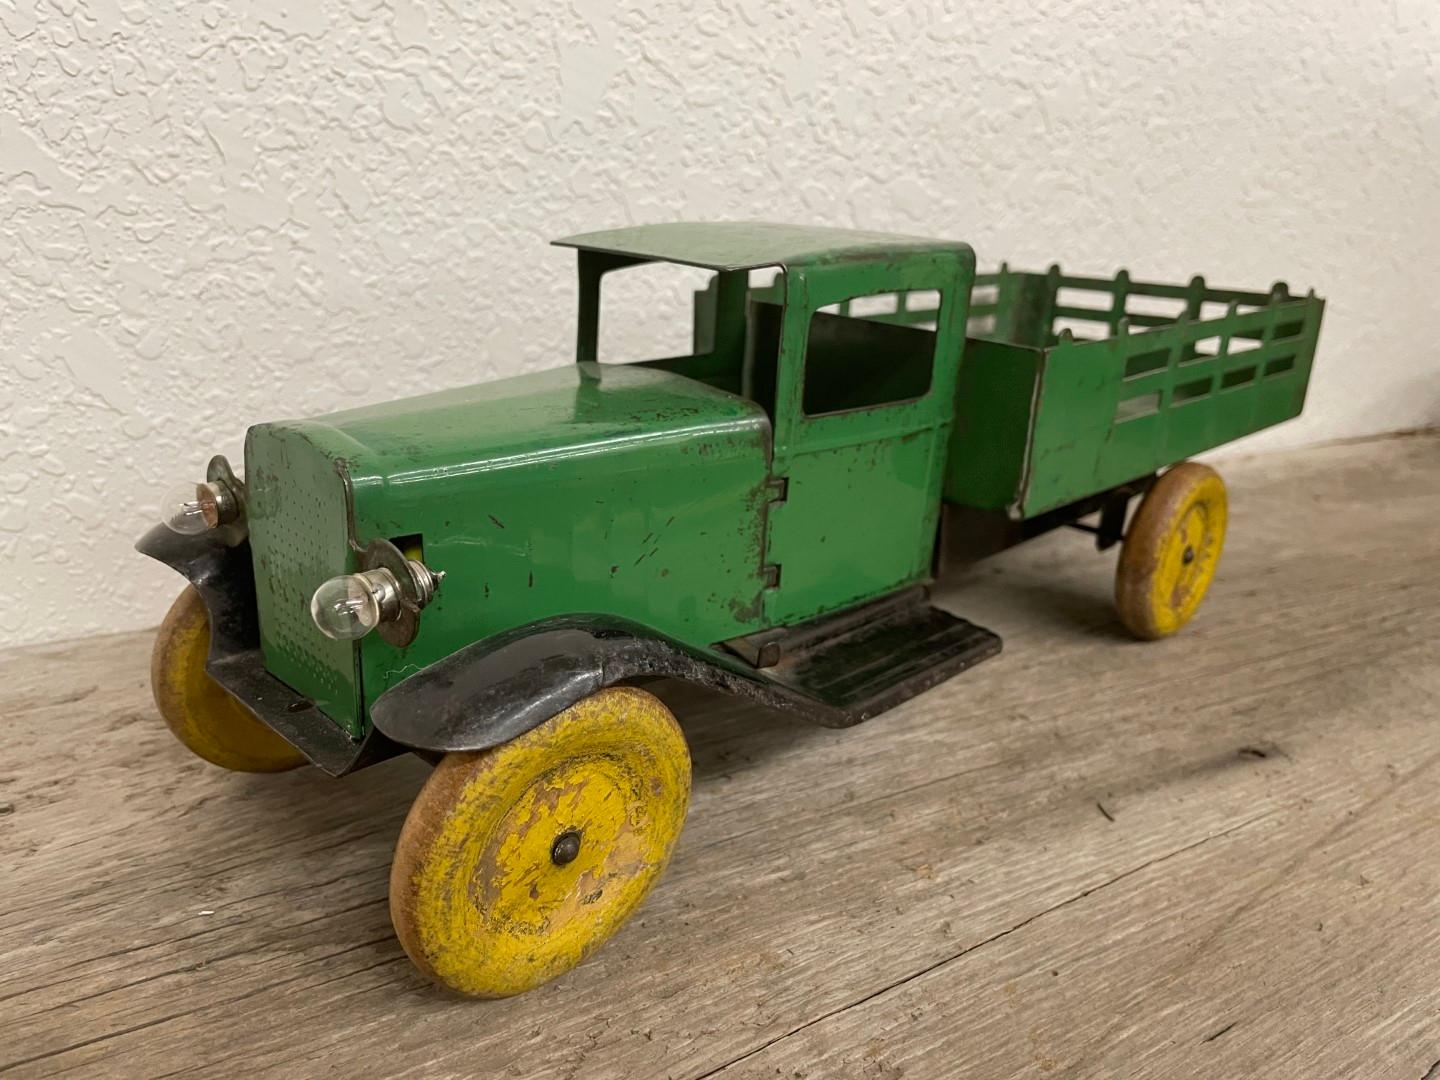 1920s Steelcraft GREEN Gate Truck pressed steel with lights